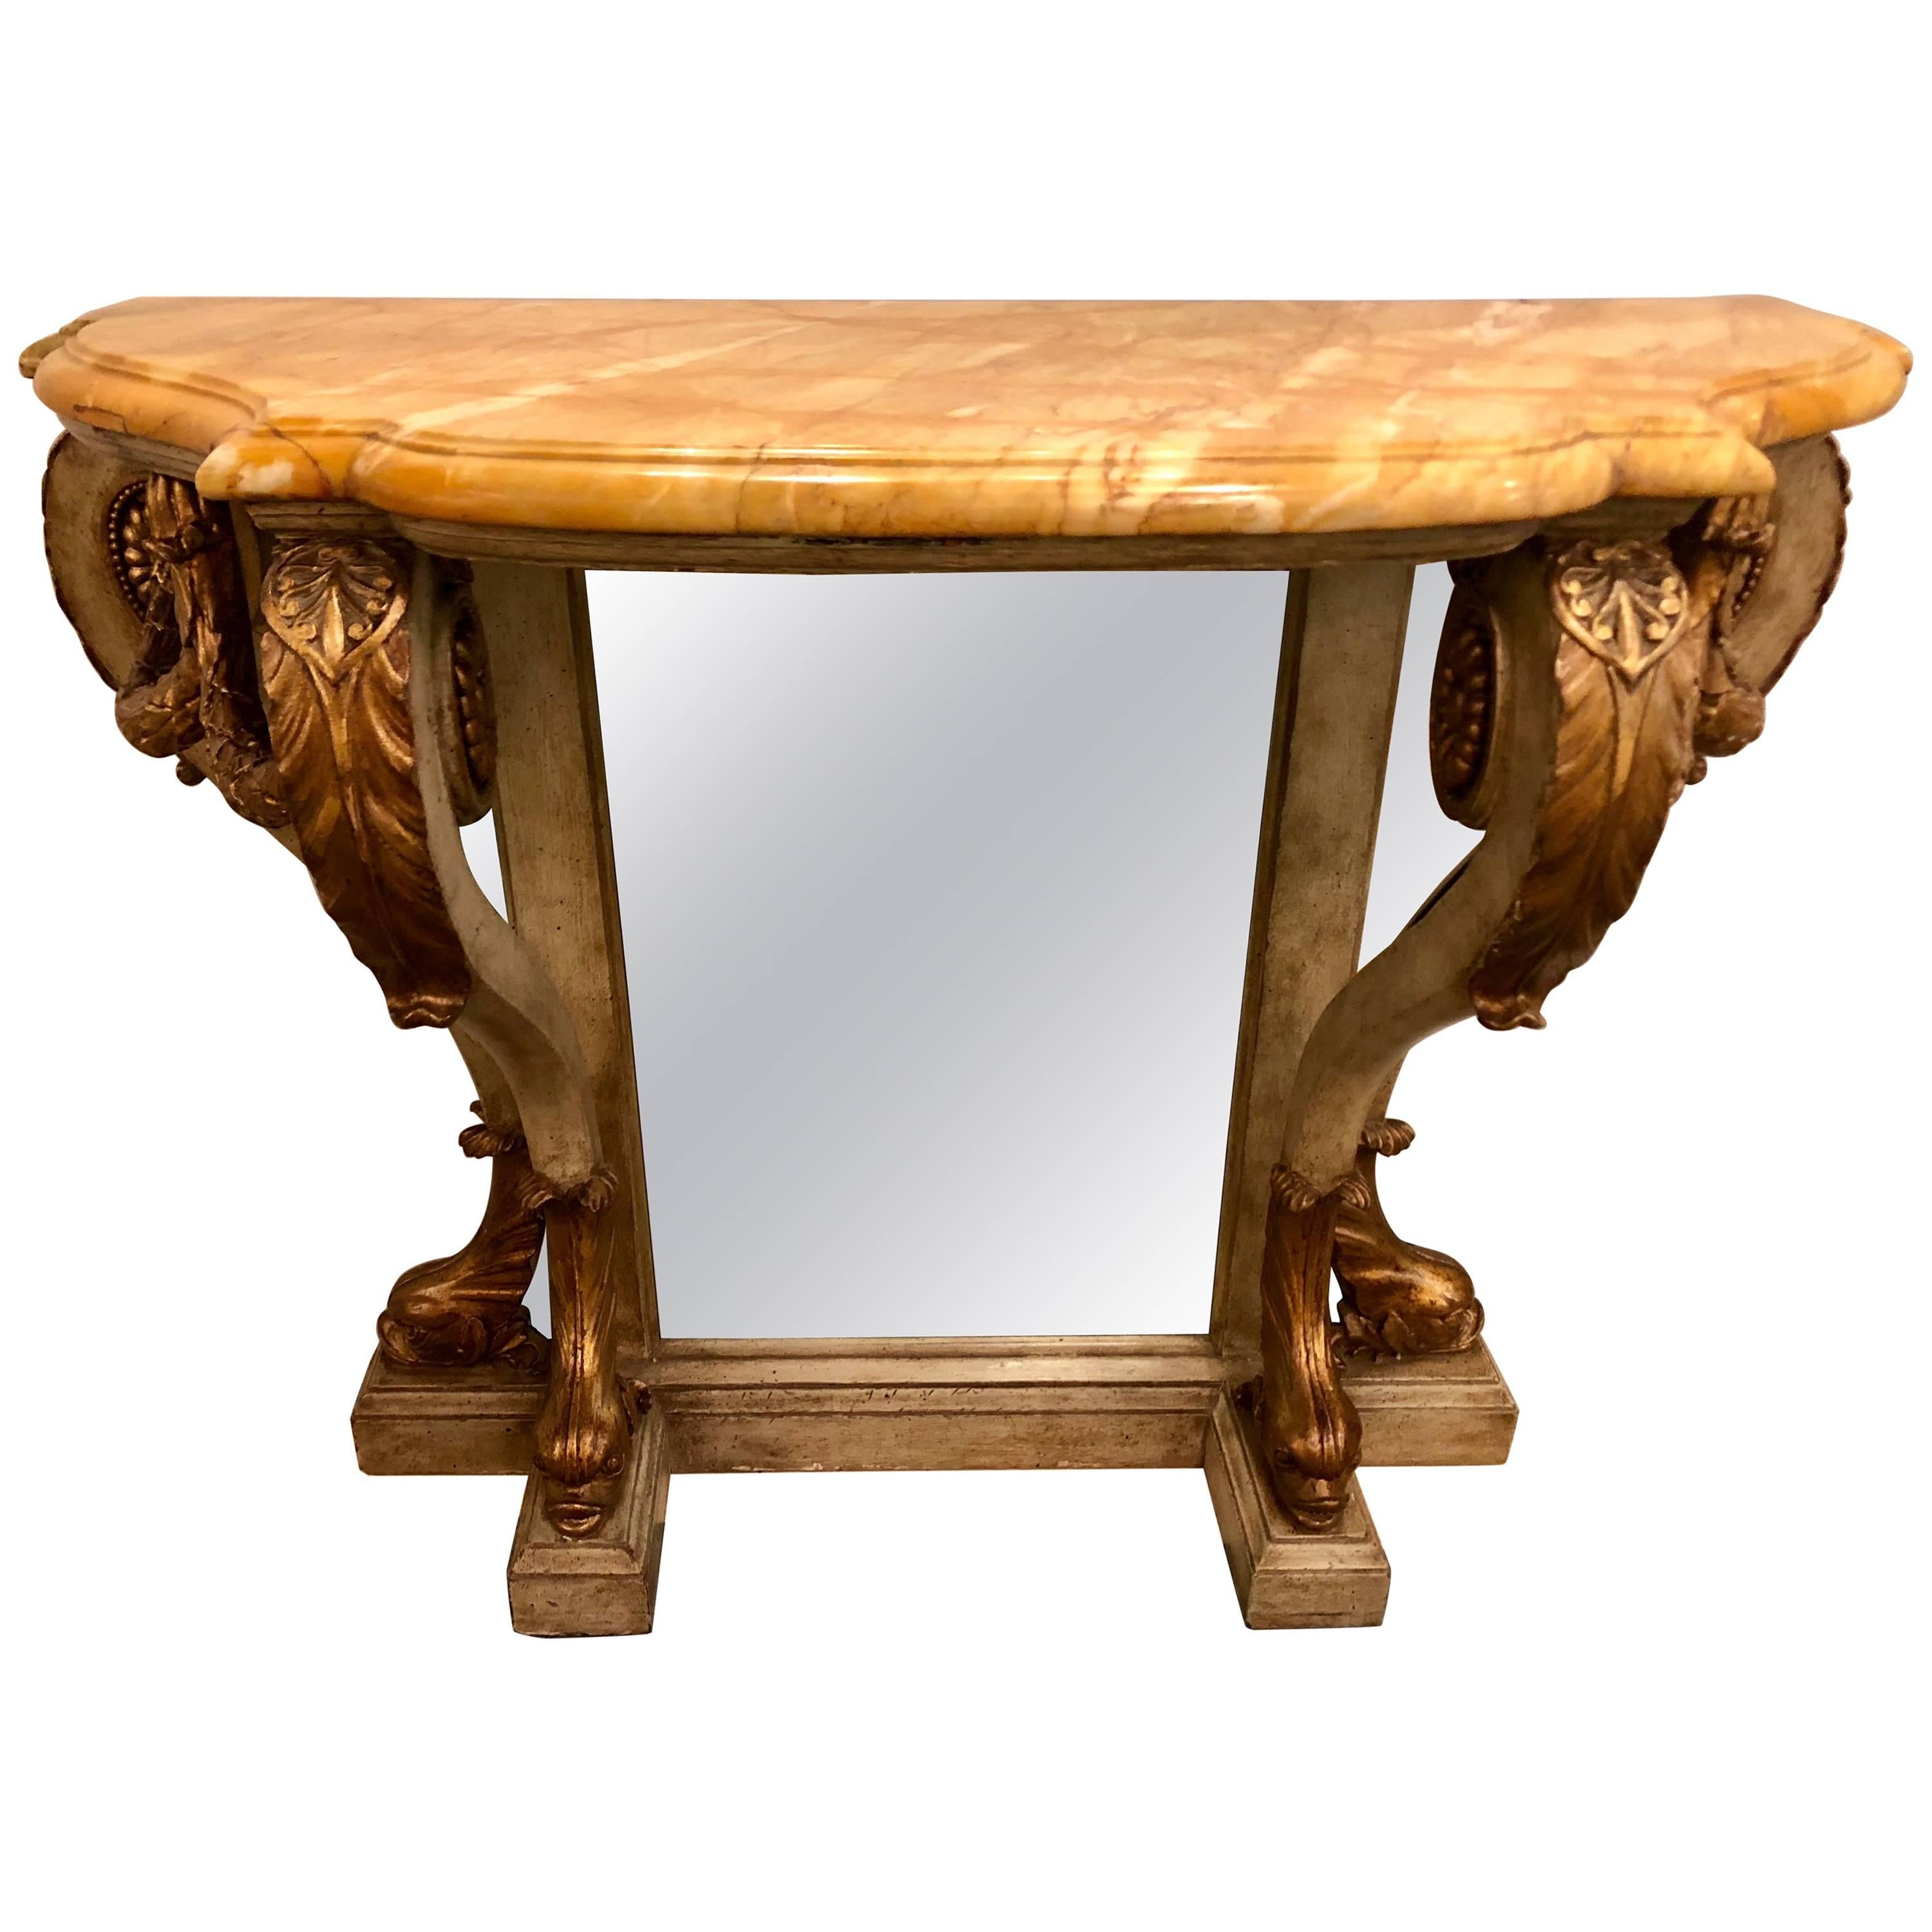 Neoclassical Style Marble-Top Bowed Table Mirrored Back Gilded Dolphin Accents For Sale